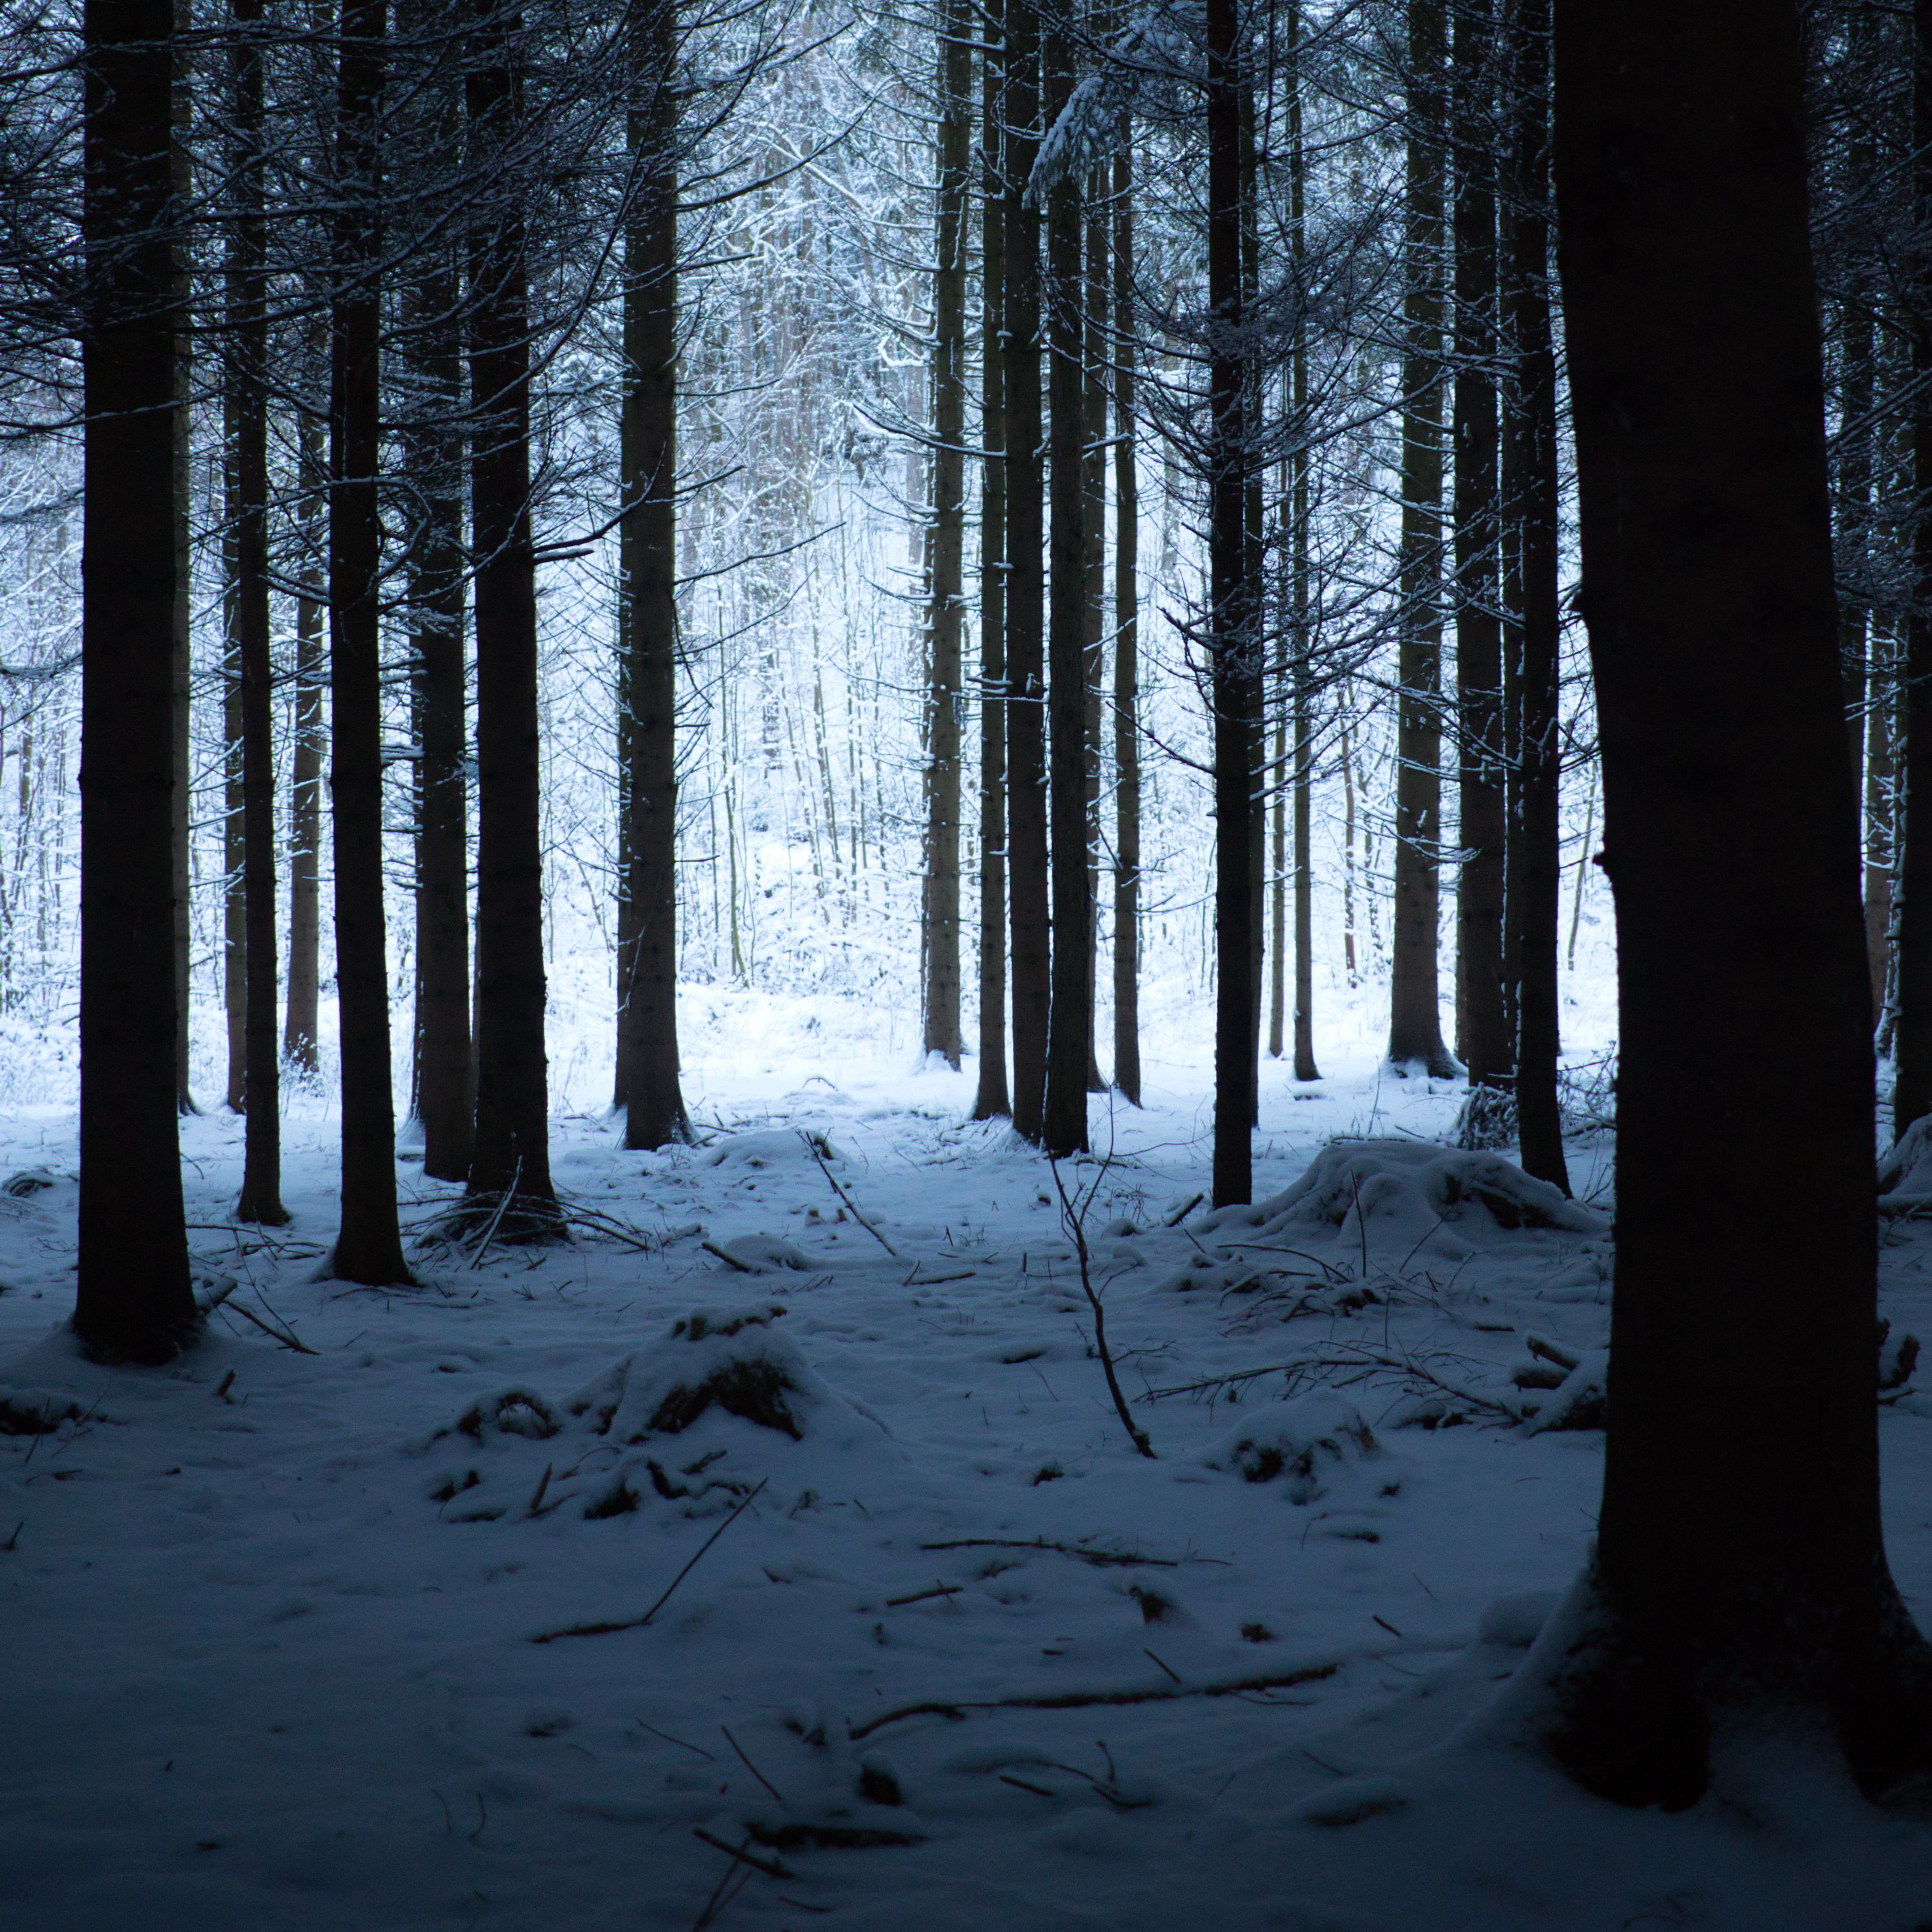 Download wallpaper 3415x3415 forest winter snow trees snowy